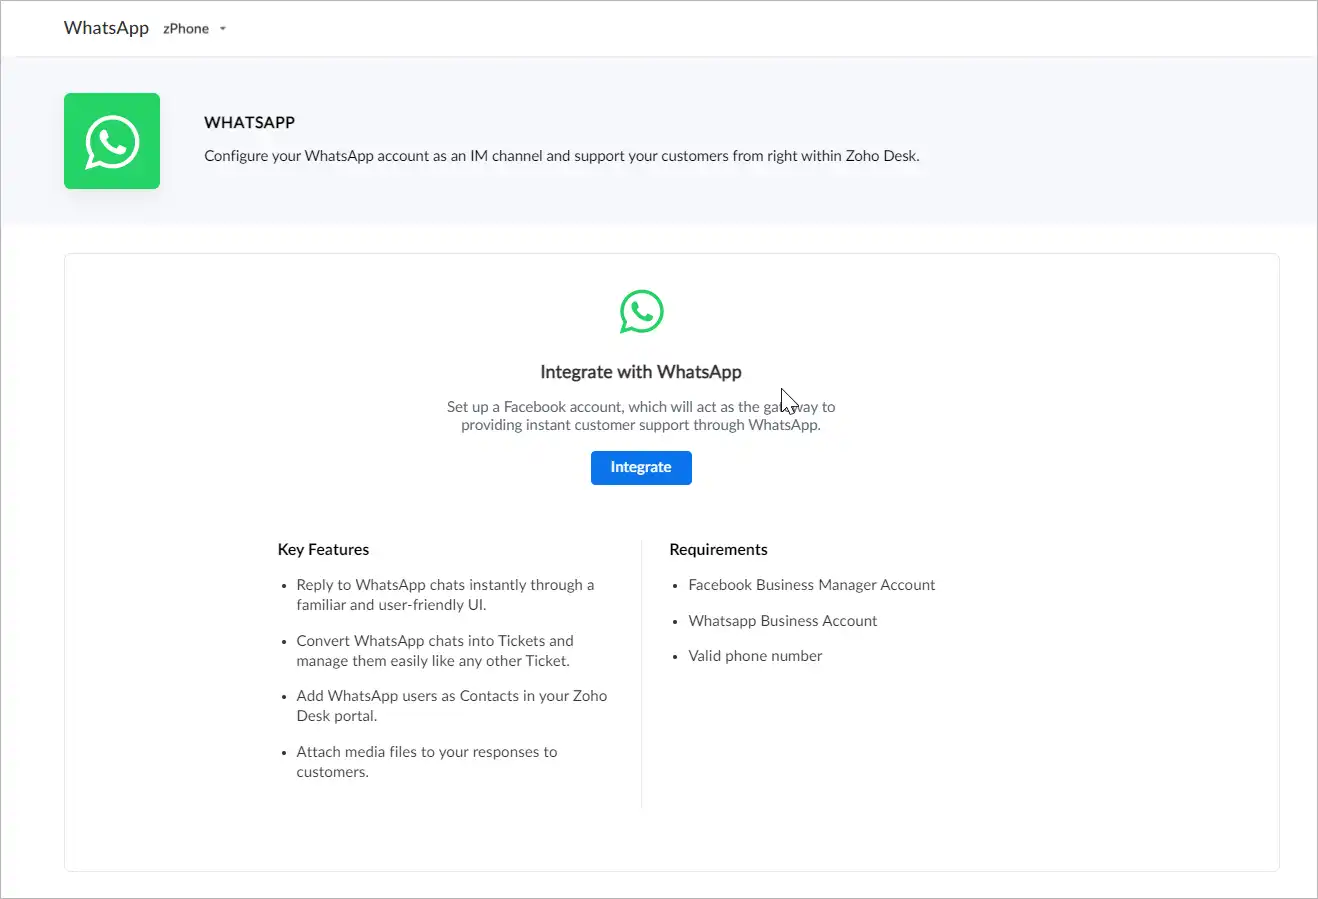 Setting Up WhatsApp Integration with Zoho Desk